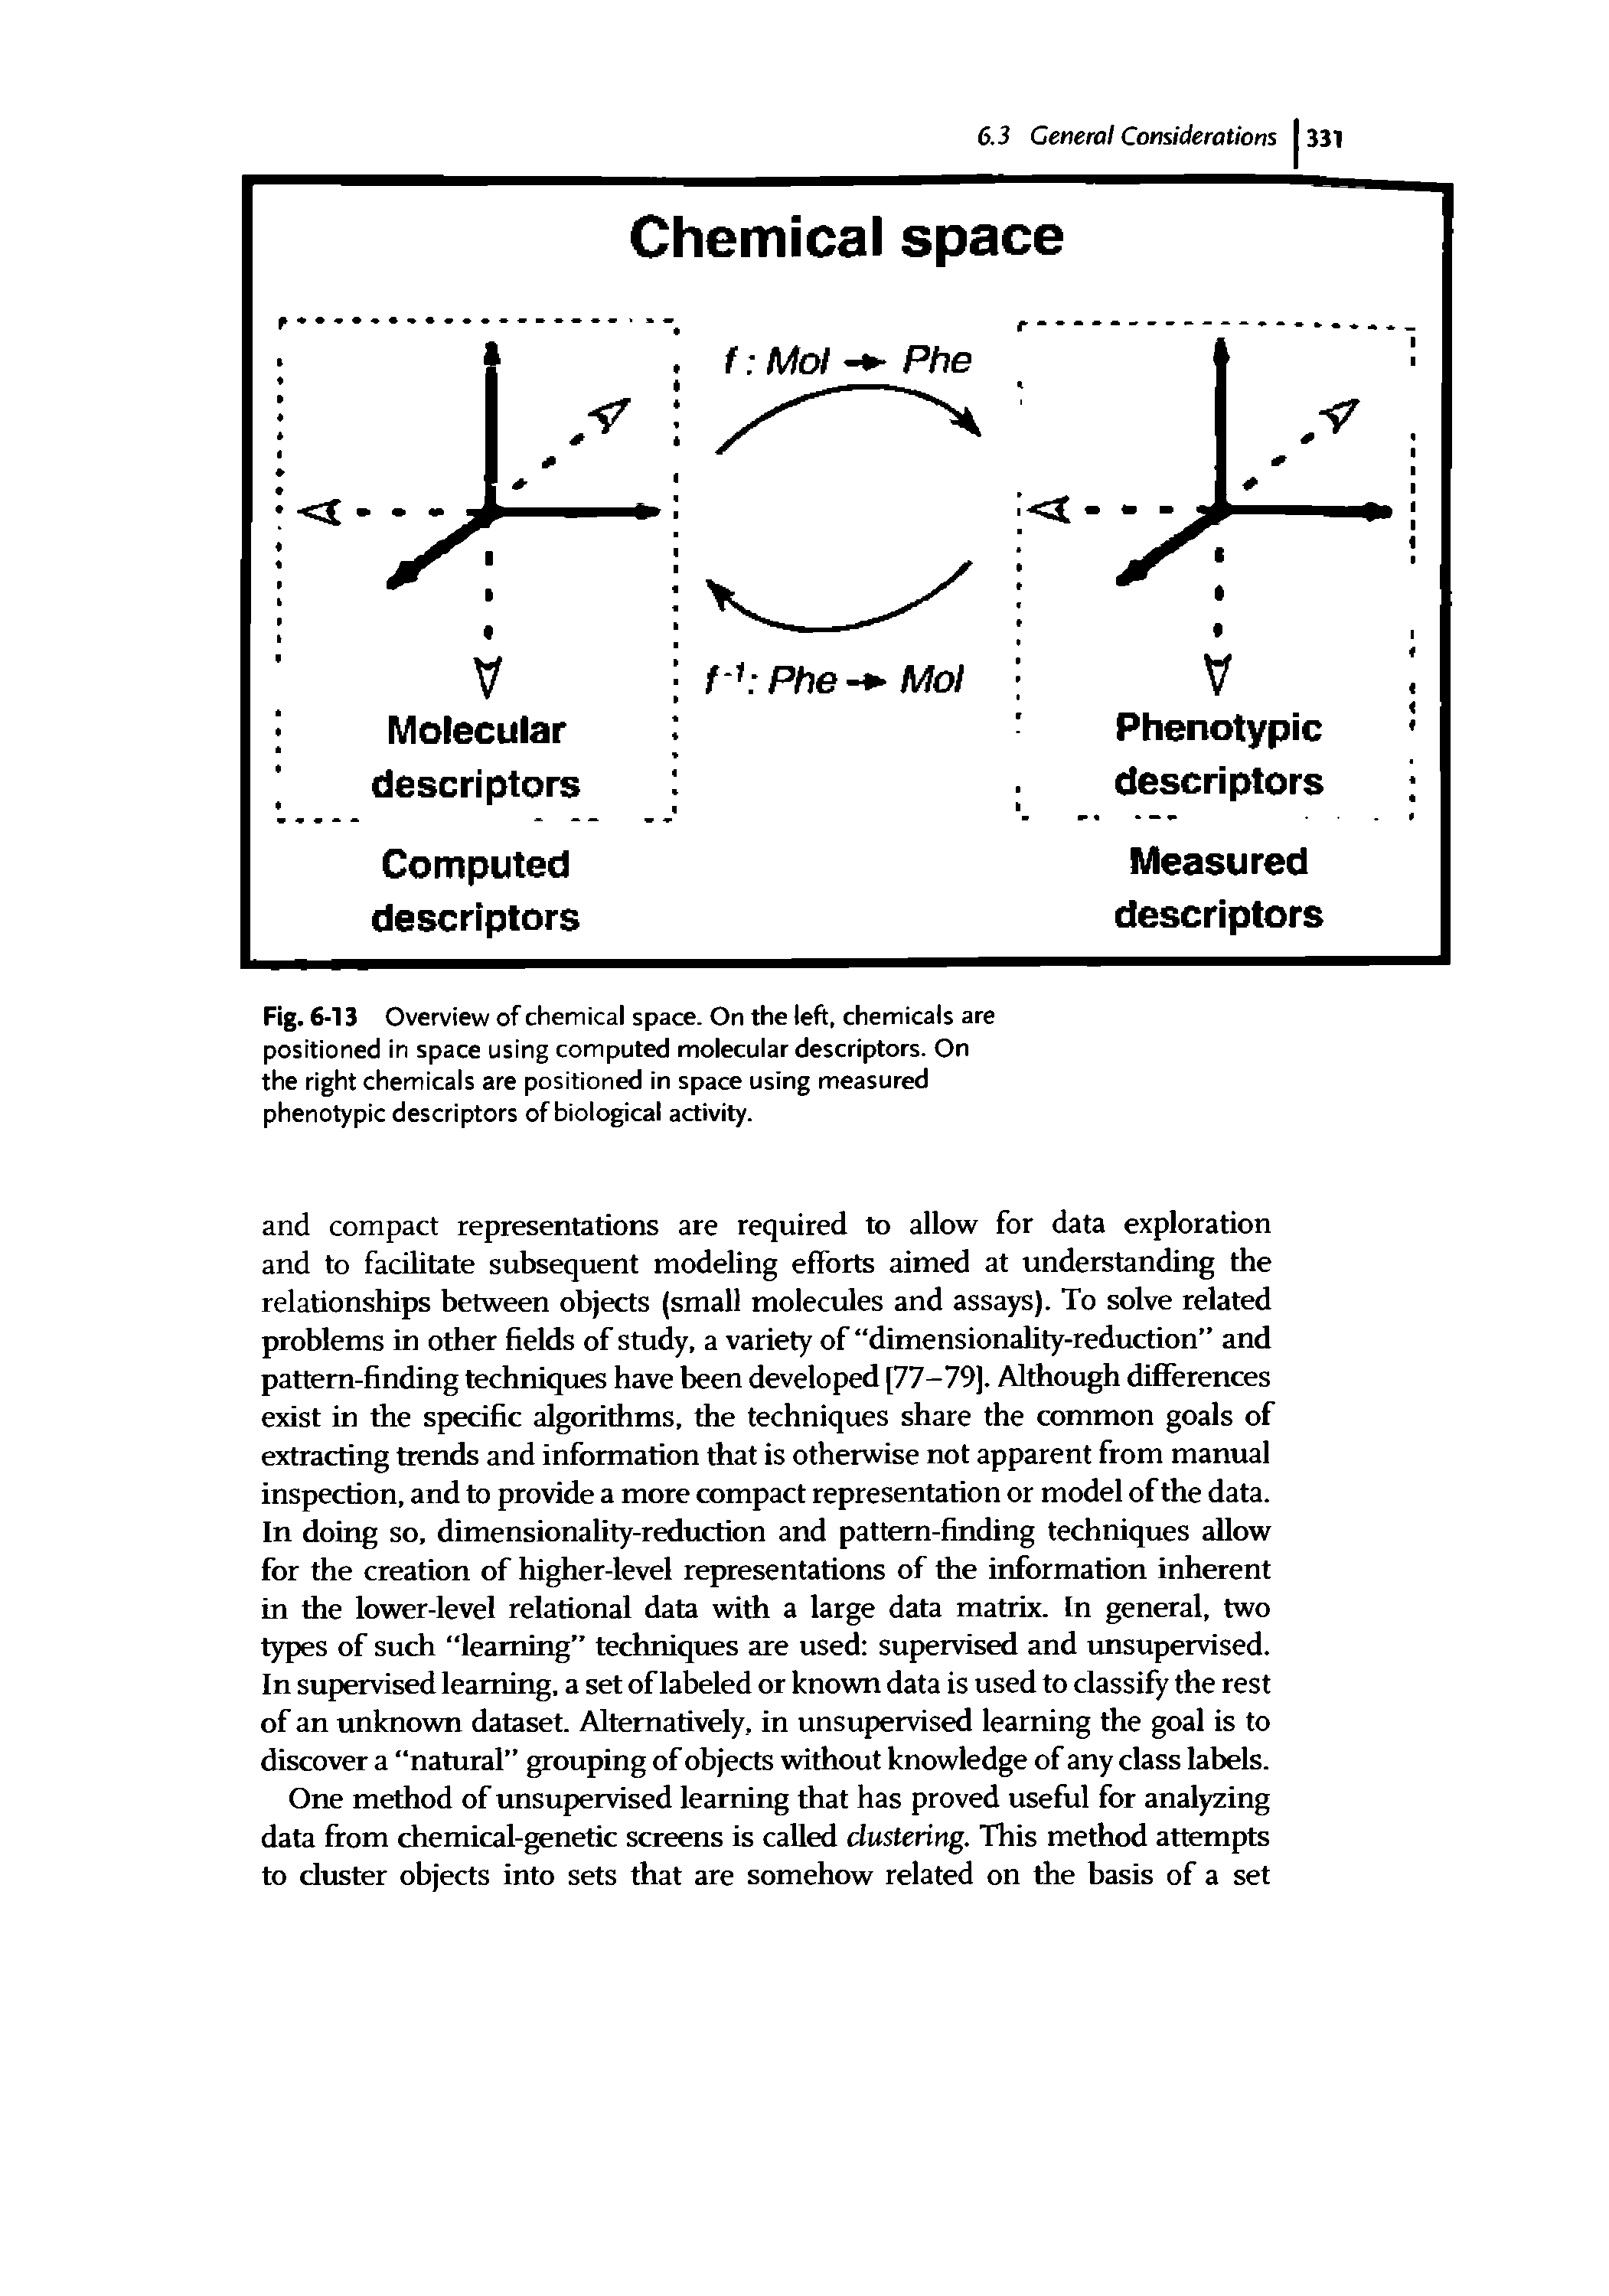 Fig. 6-13 Overview of chemical space. On the left, chemicals are positioned in space using computed molecular descriptors. On the right chemicals are positioned in space using measured phenotypic descriptors of biological activity.